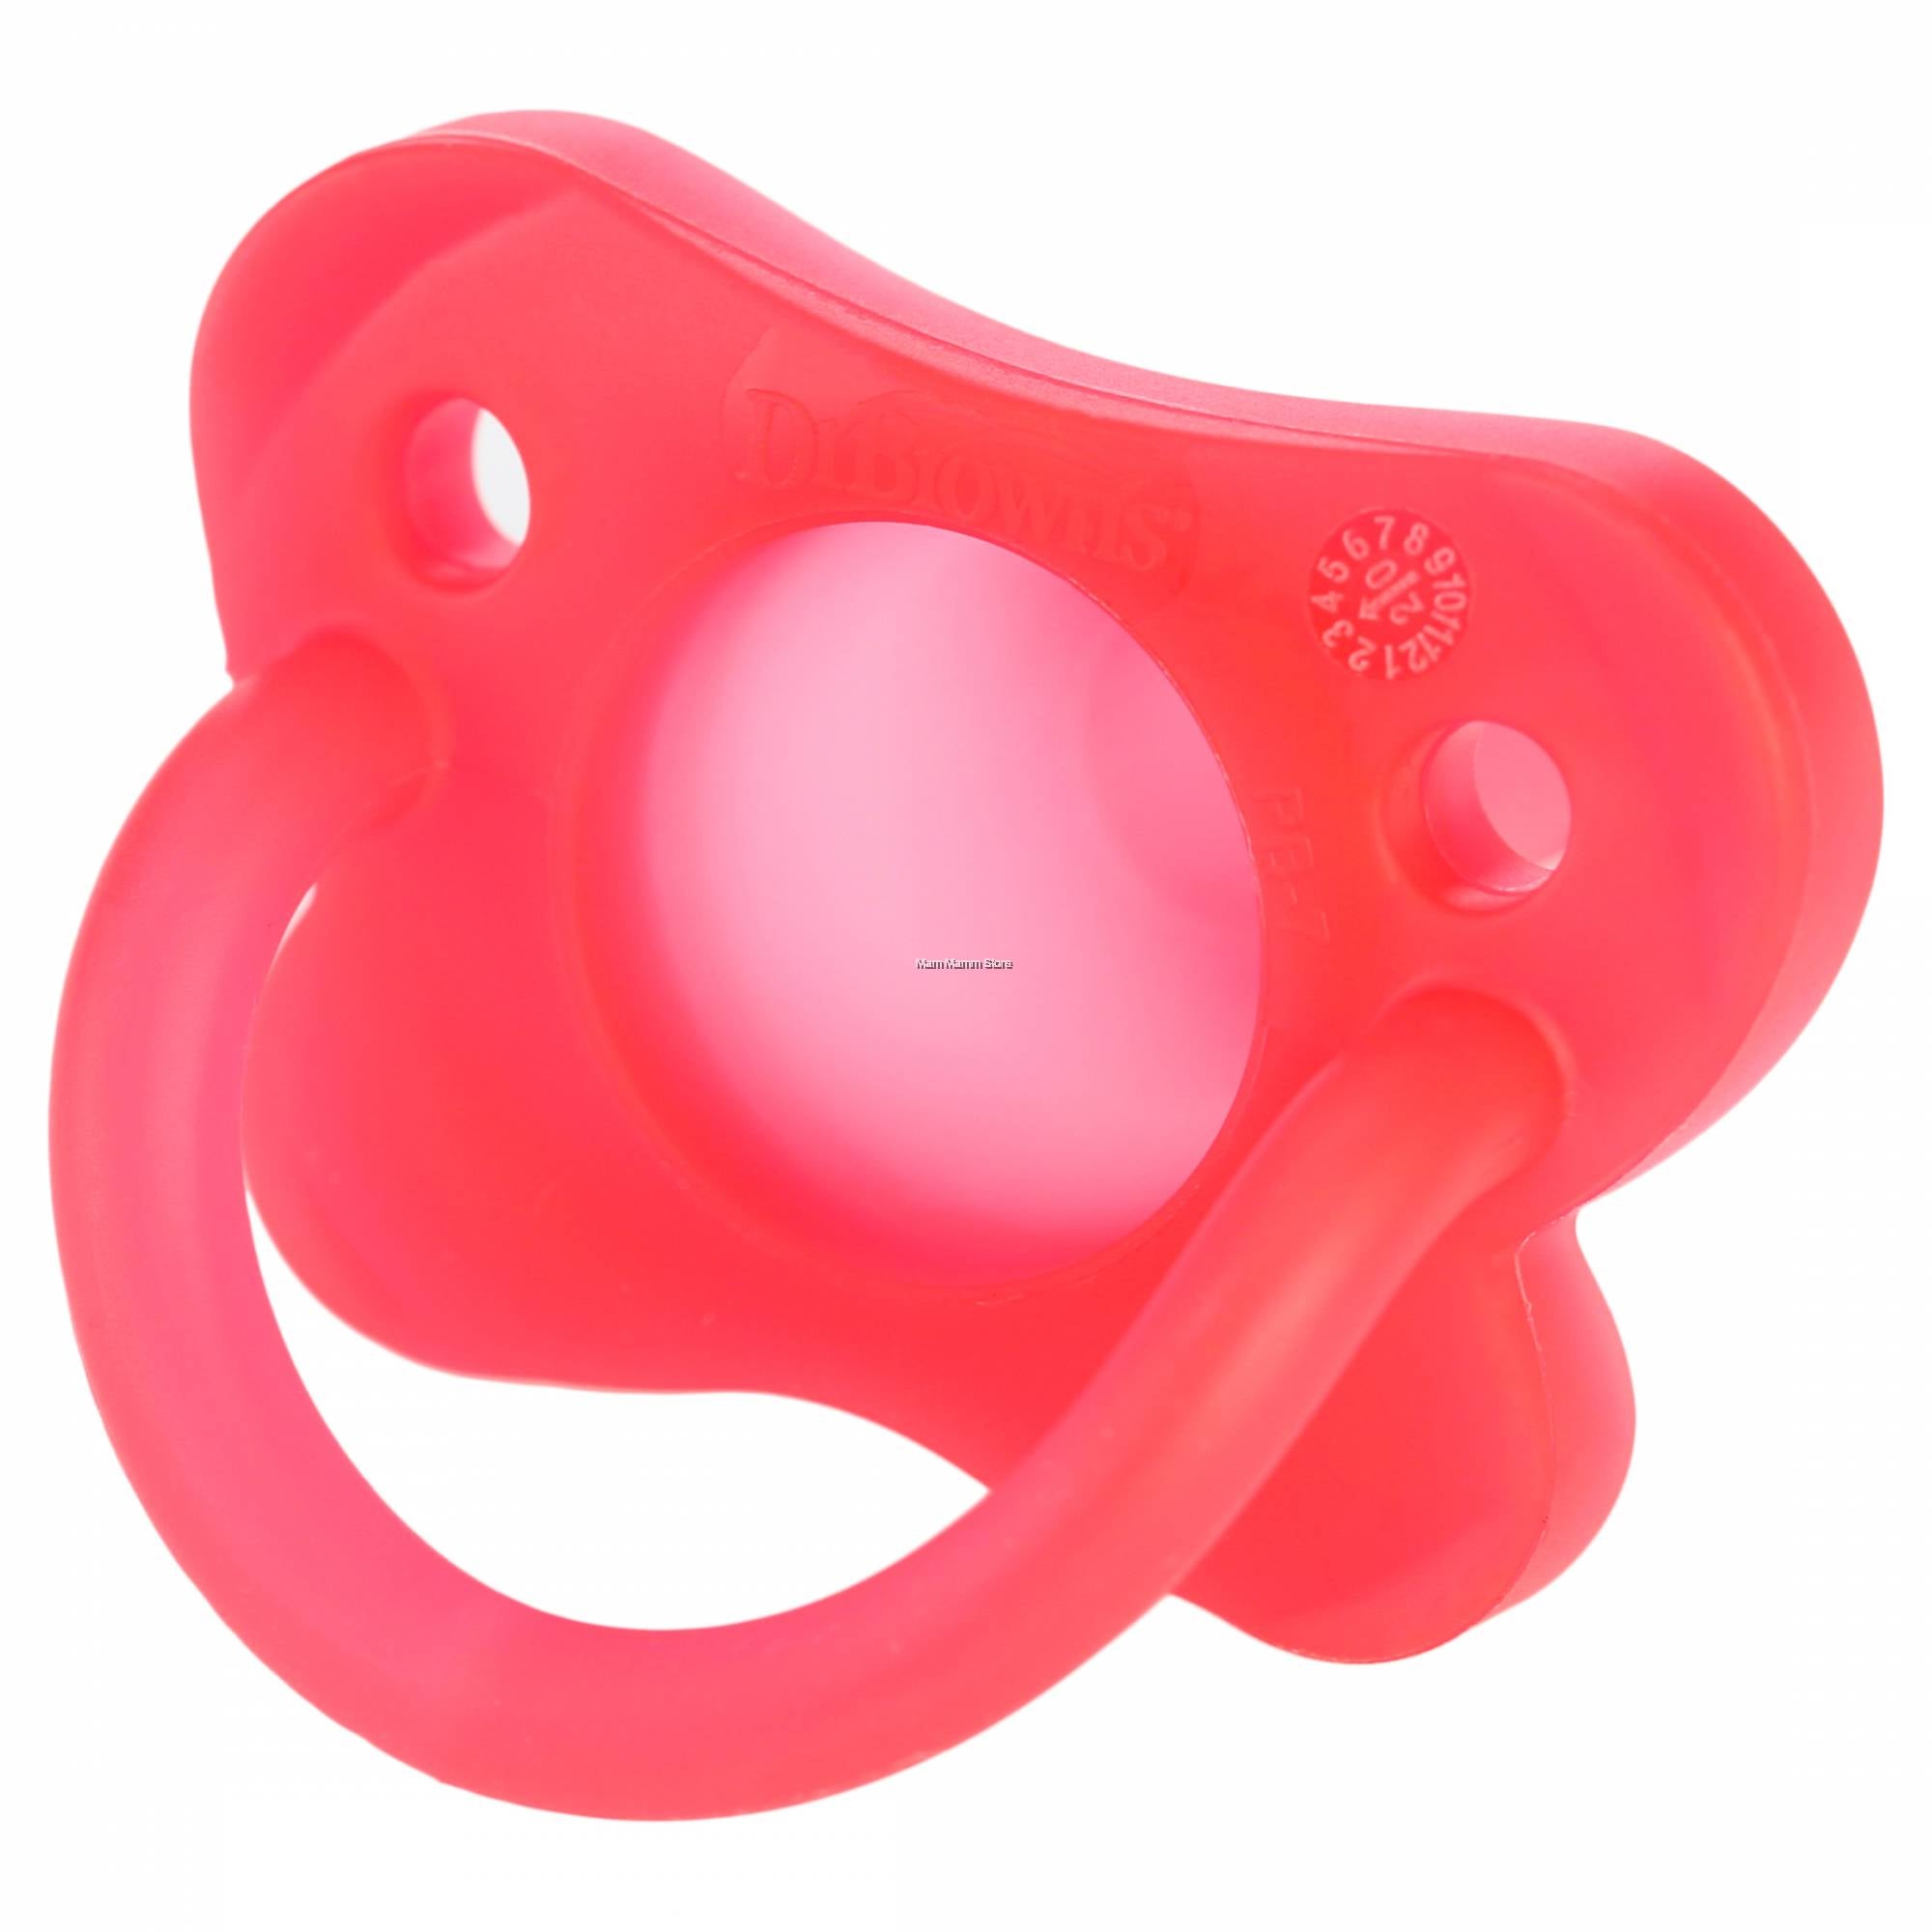 Dr. Brown's Happy Paci Silicone Two-Piece Soother, 0-6m - Pink